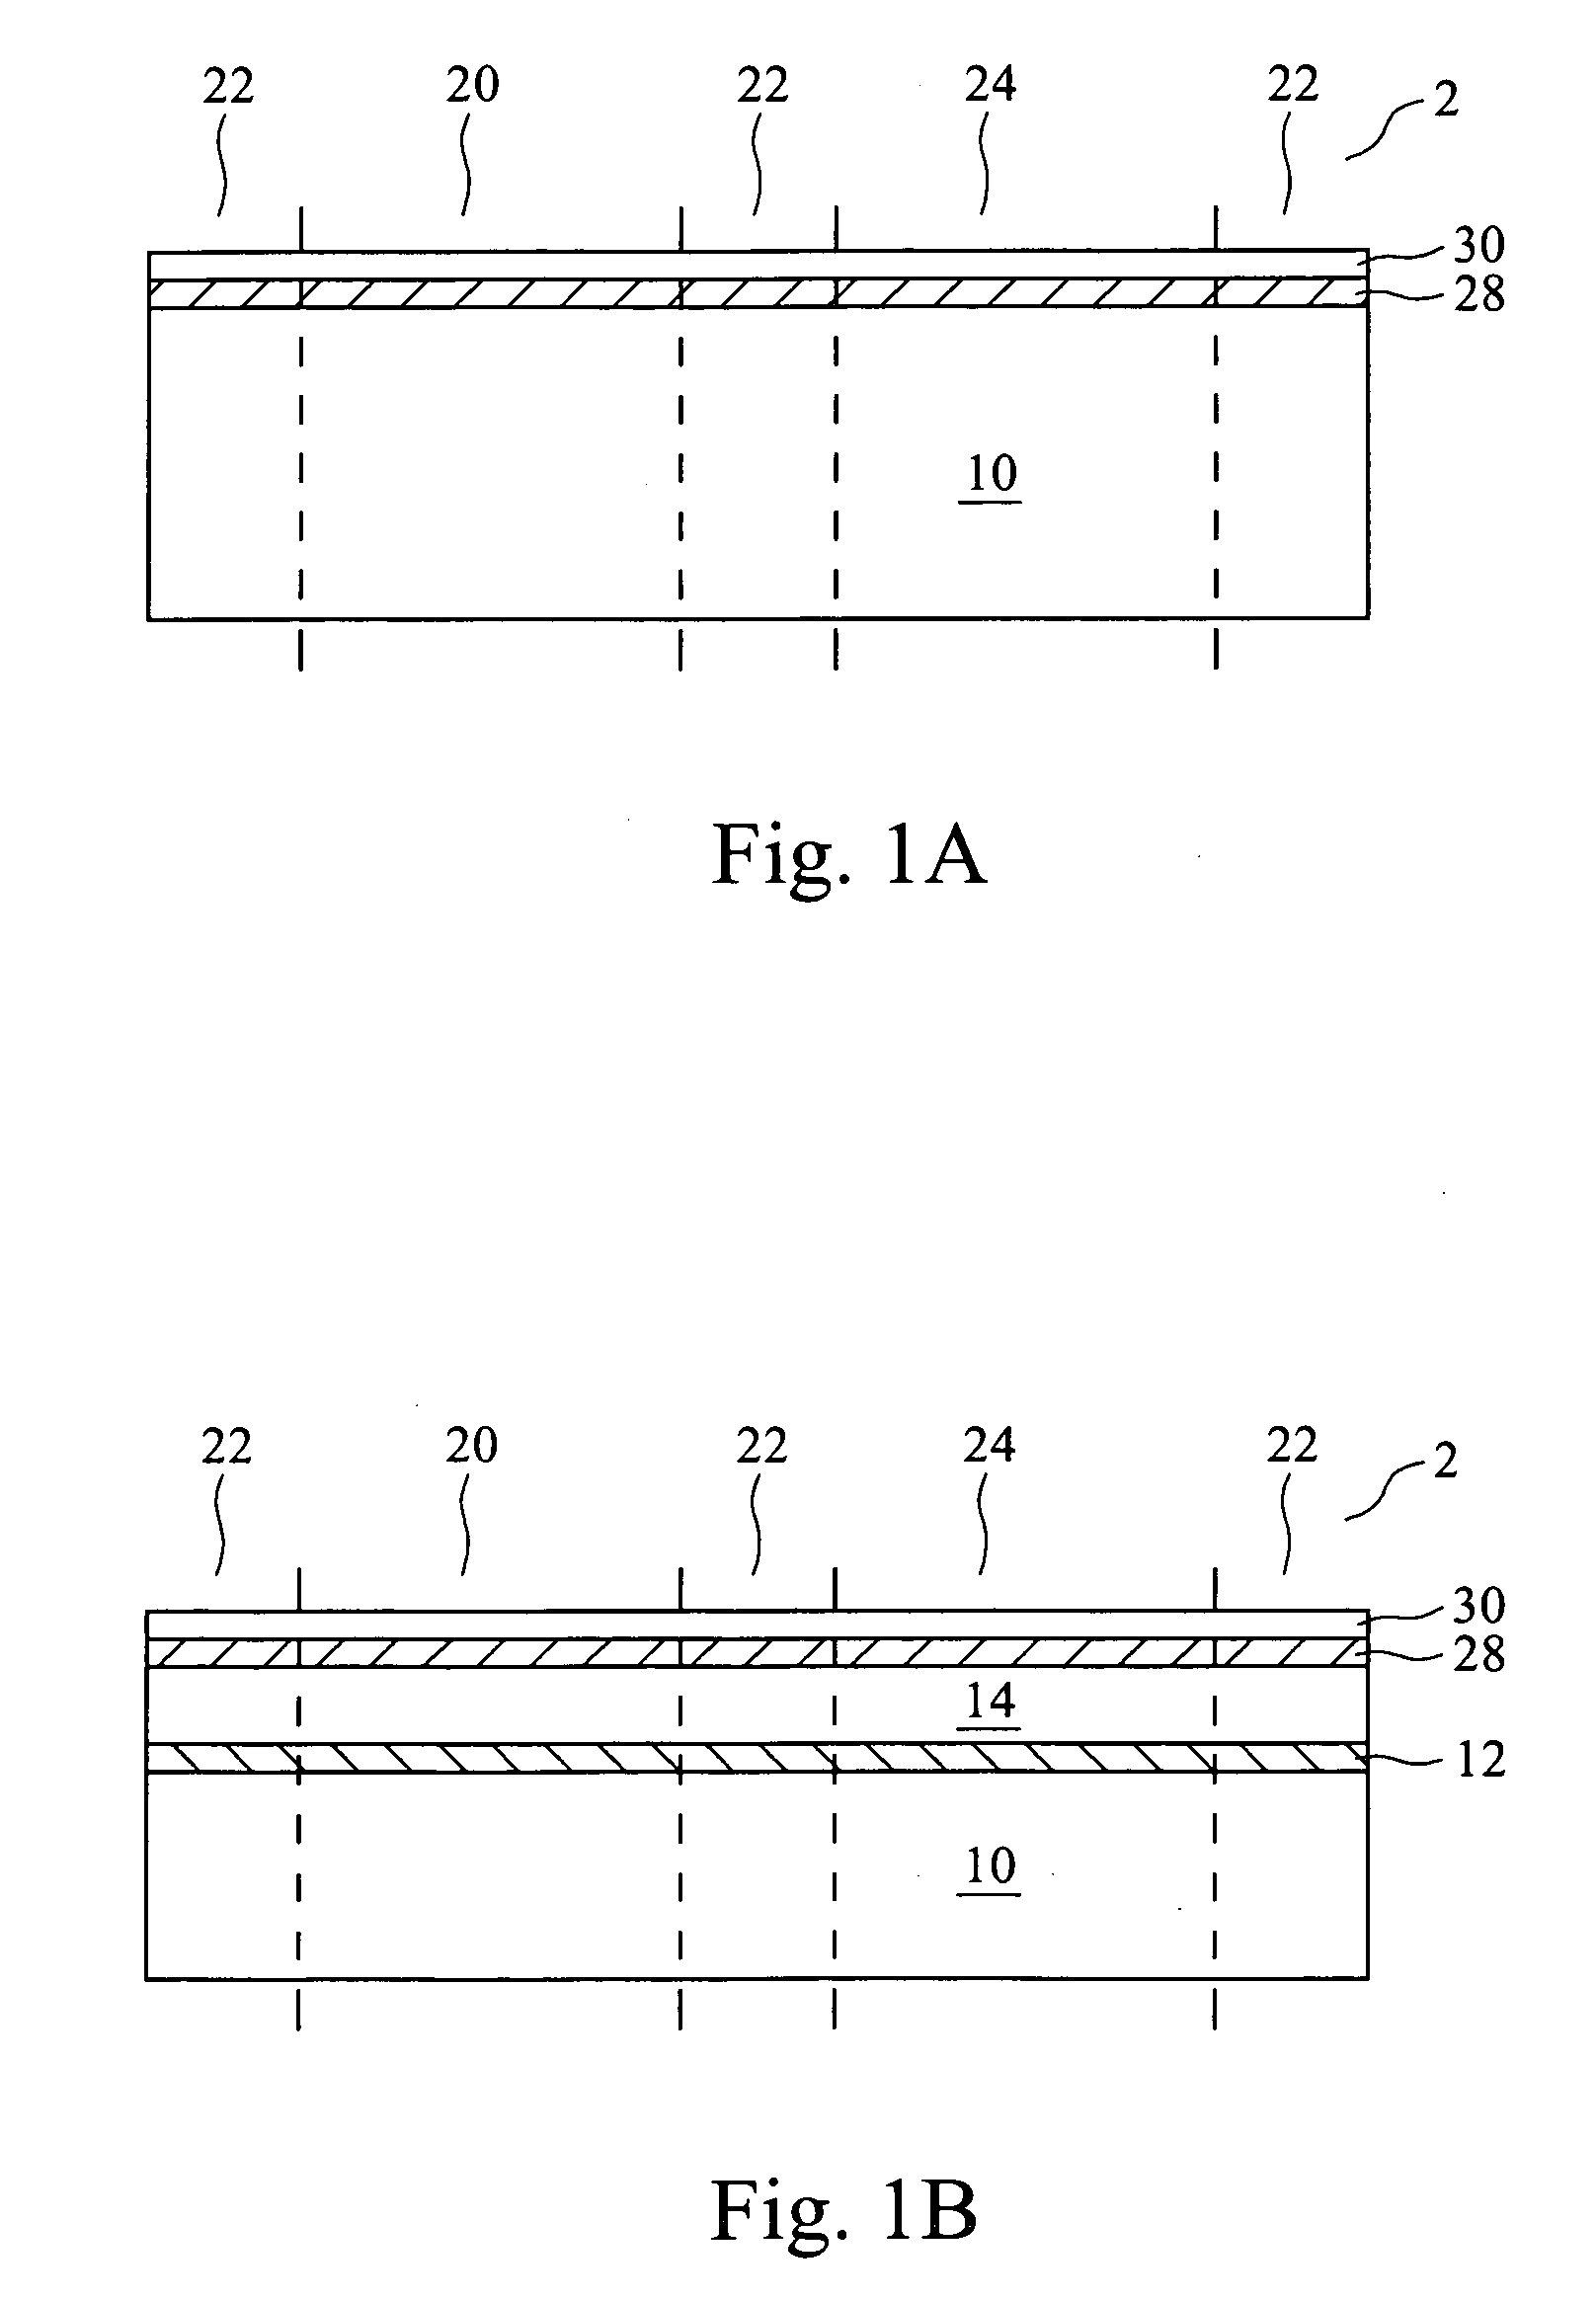 Pattern loading effect reduction for selective epitaxial growth